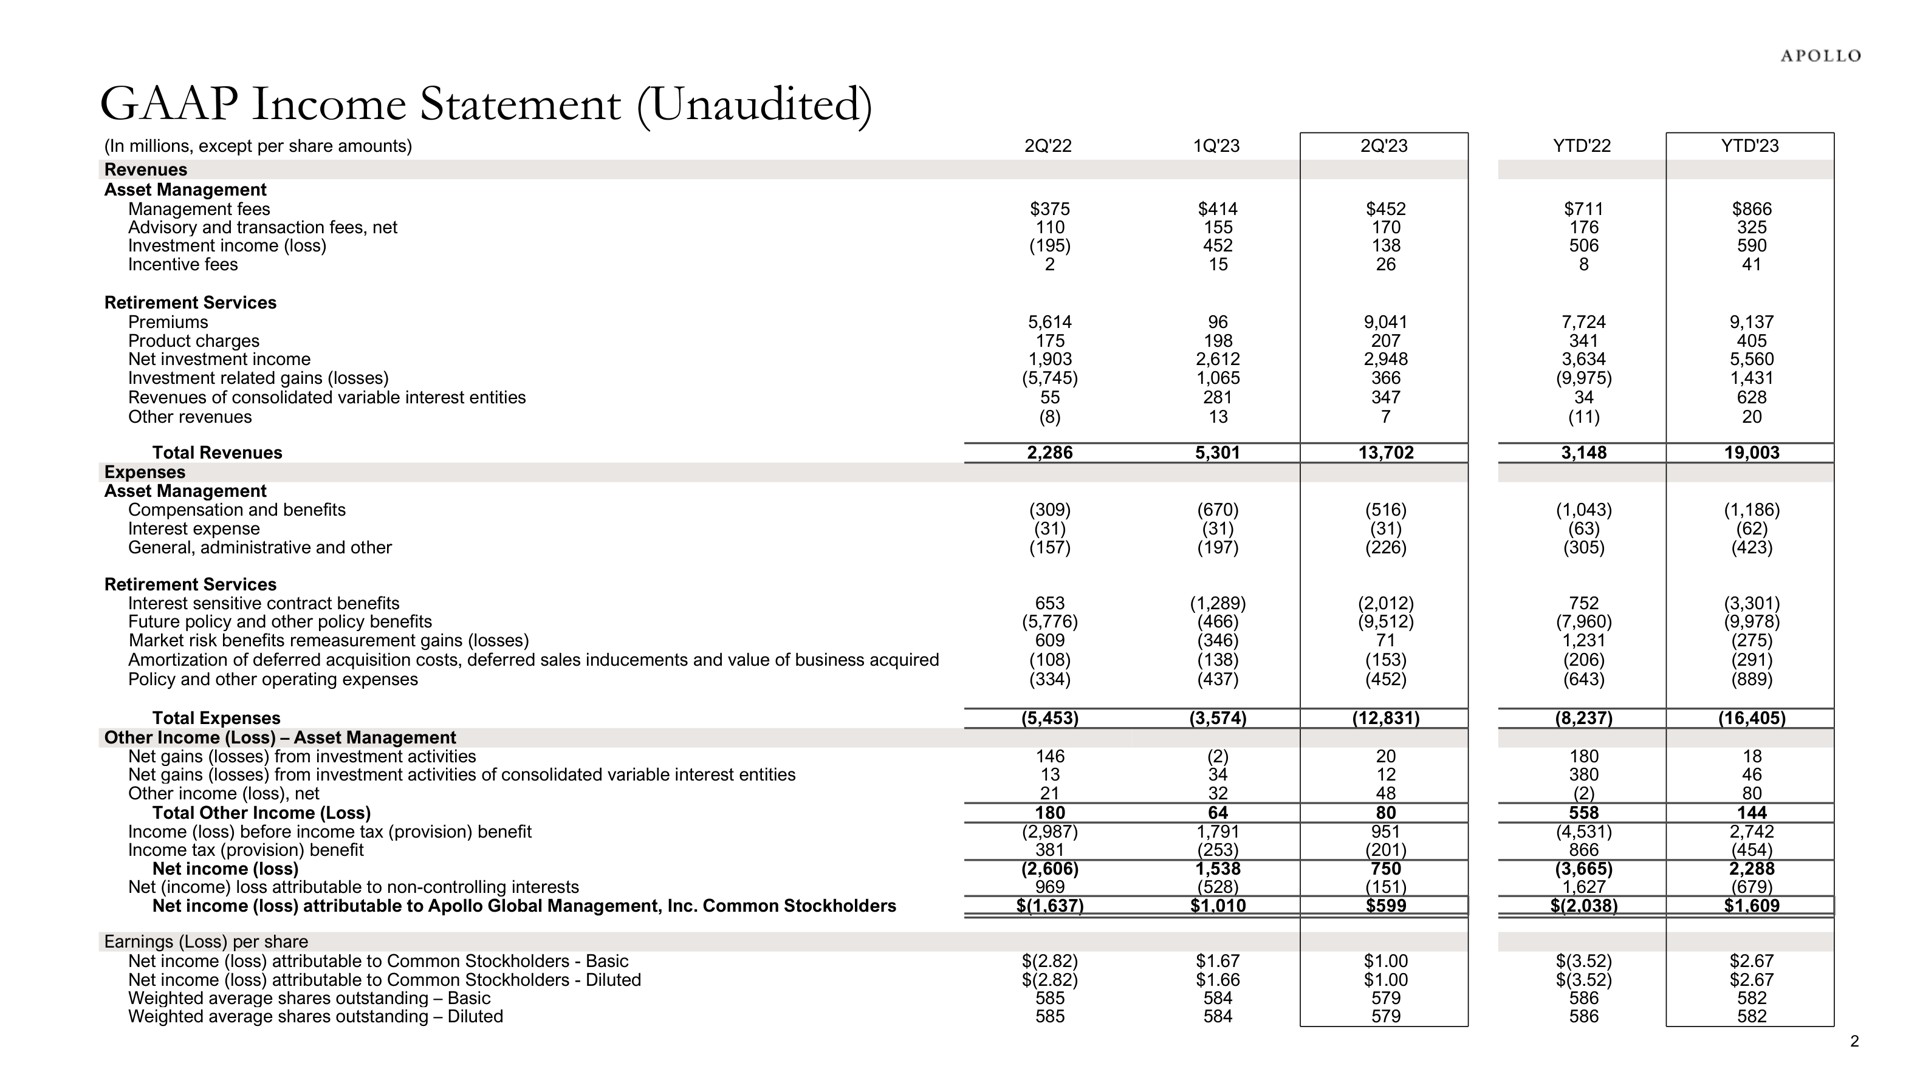 income statement unaudited | Apollo Global Management